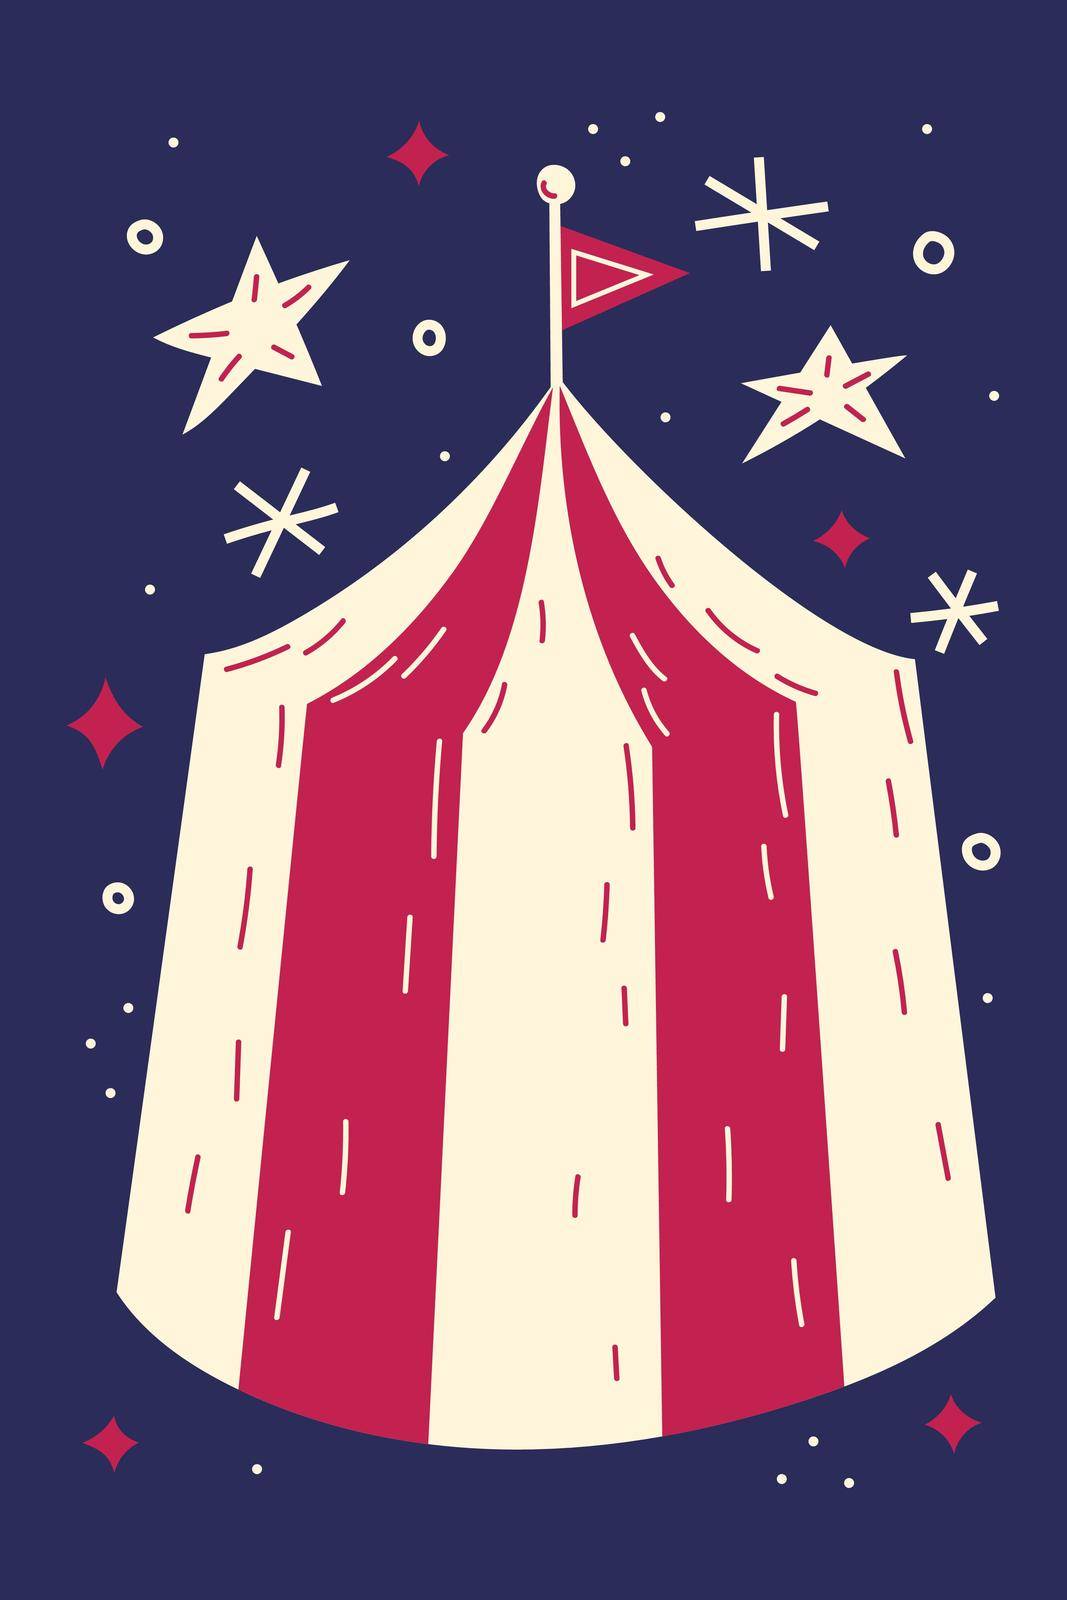 Vintage style illustration of a circus tent with stars on a dark blue background. Carnival design element.